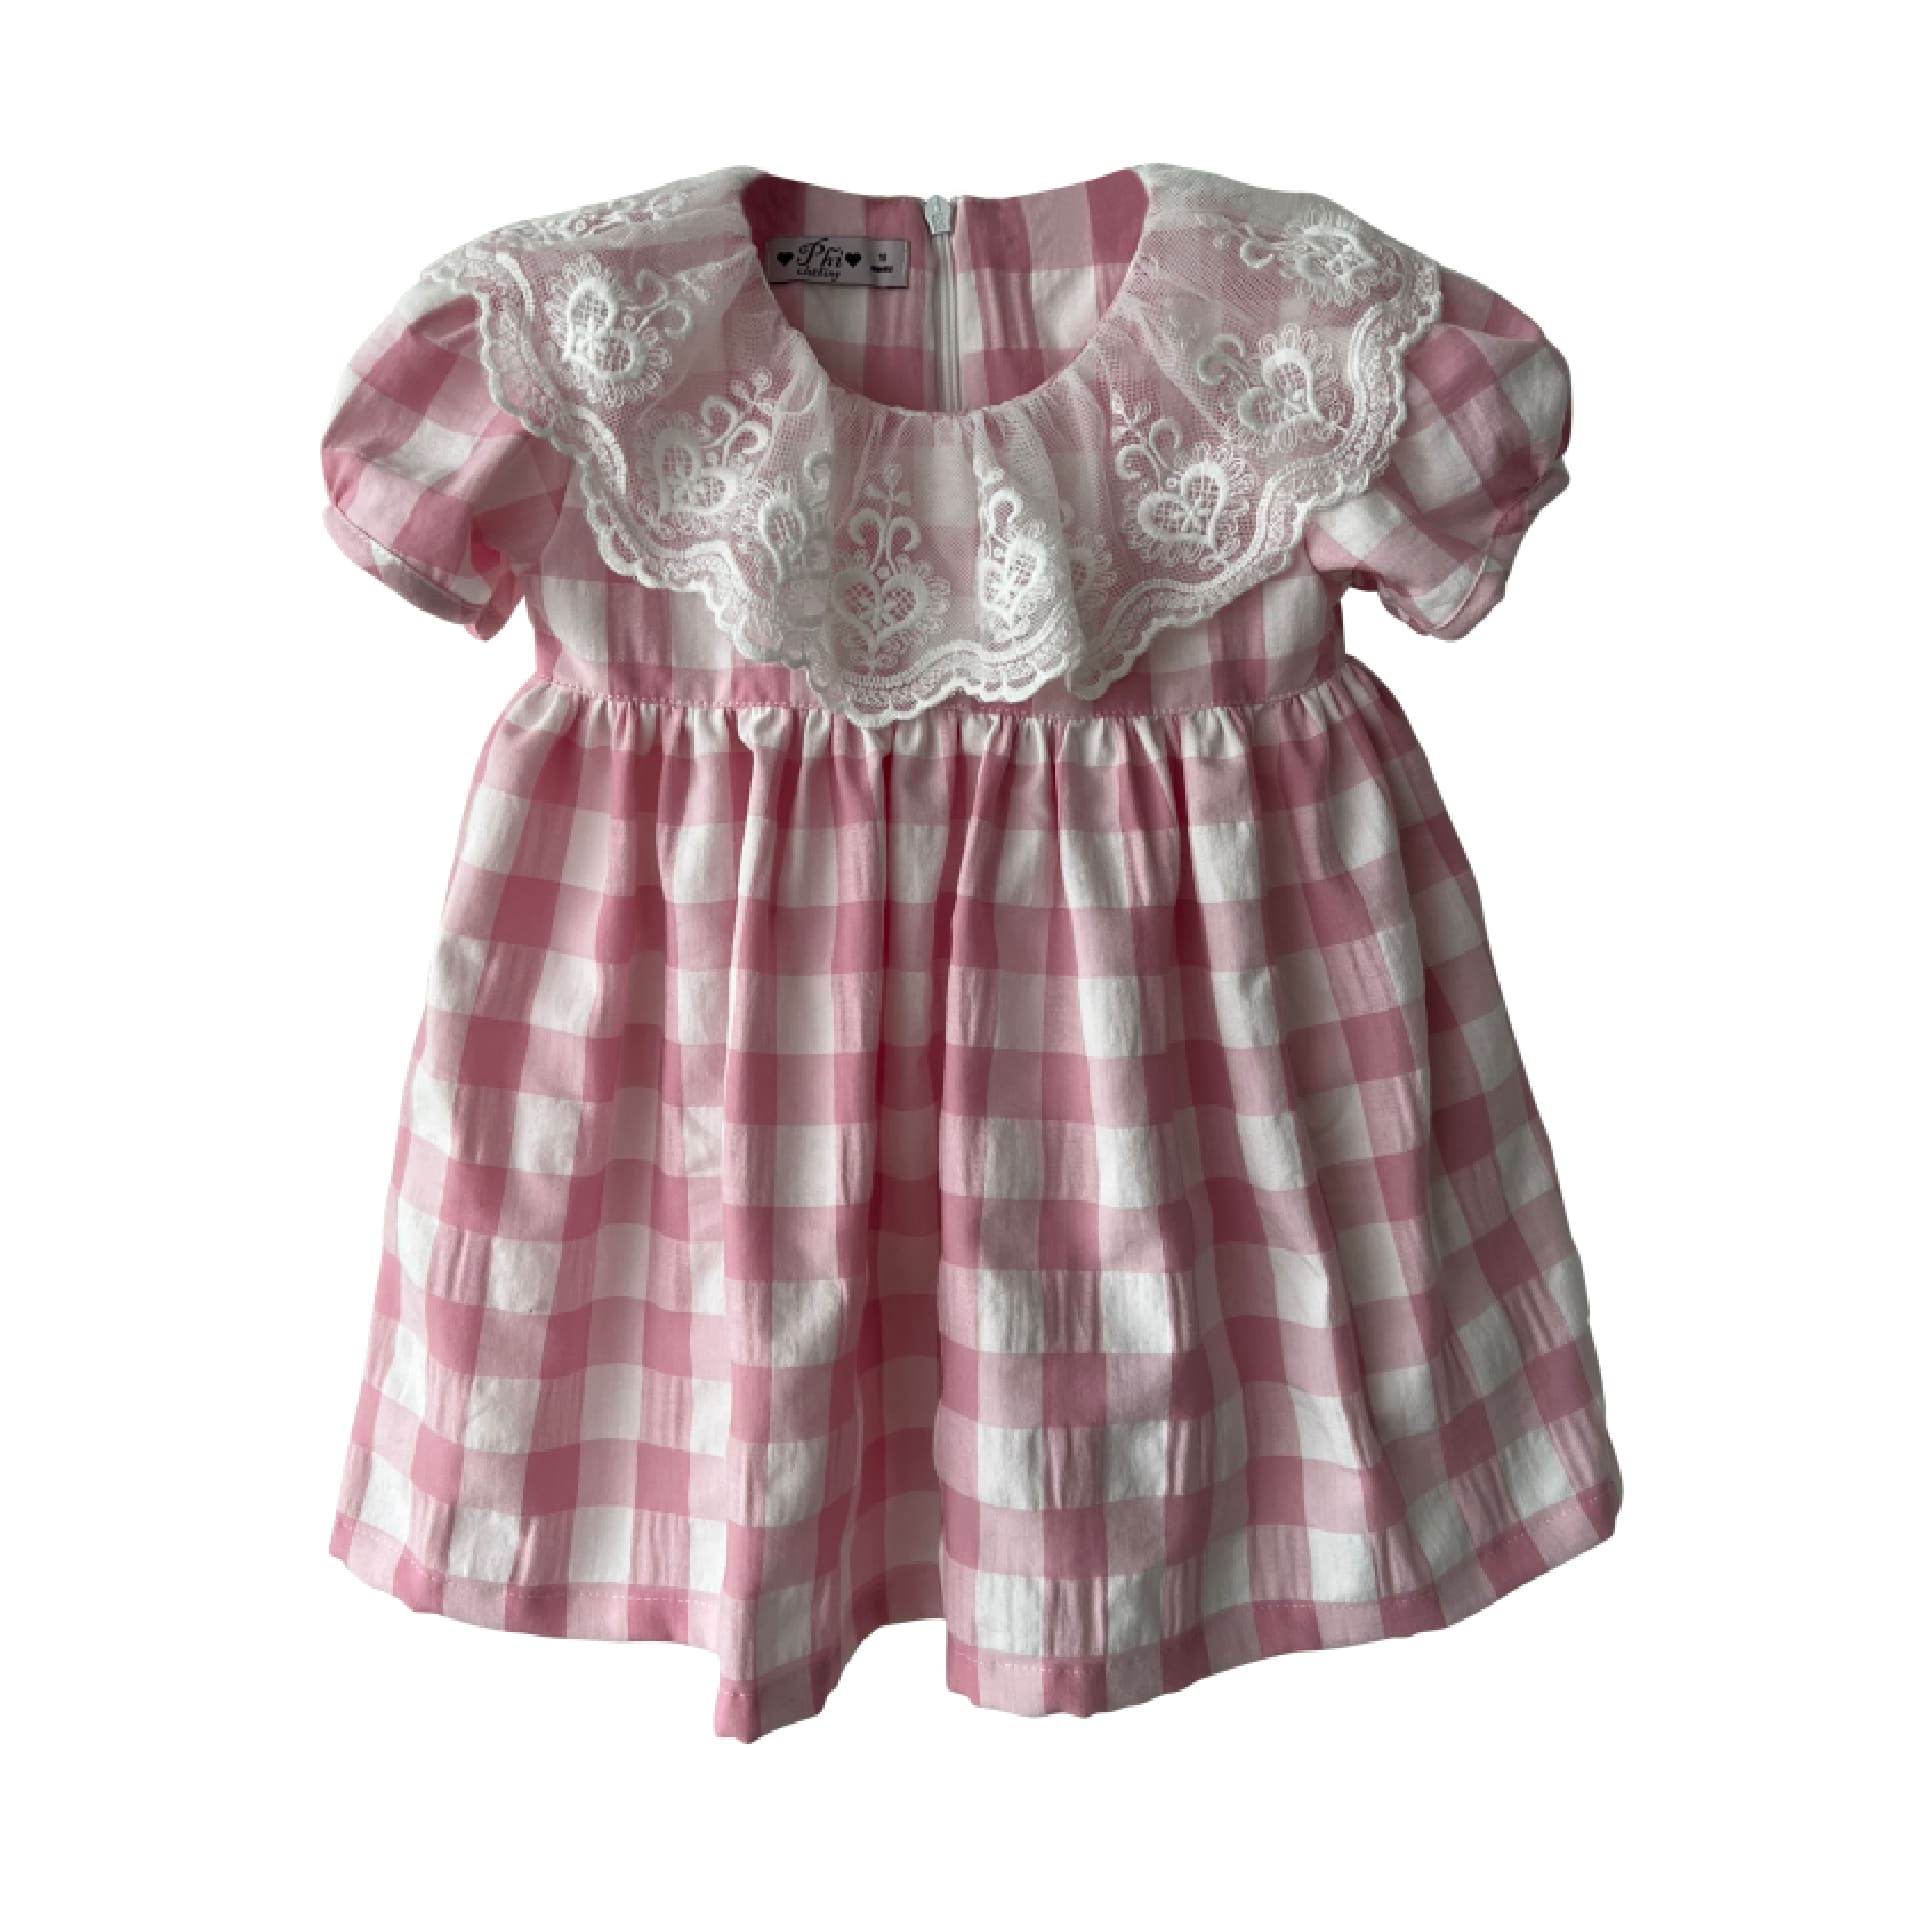 Pink check dress with tule